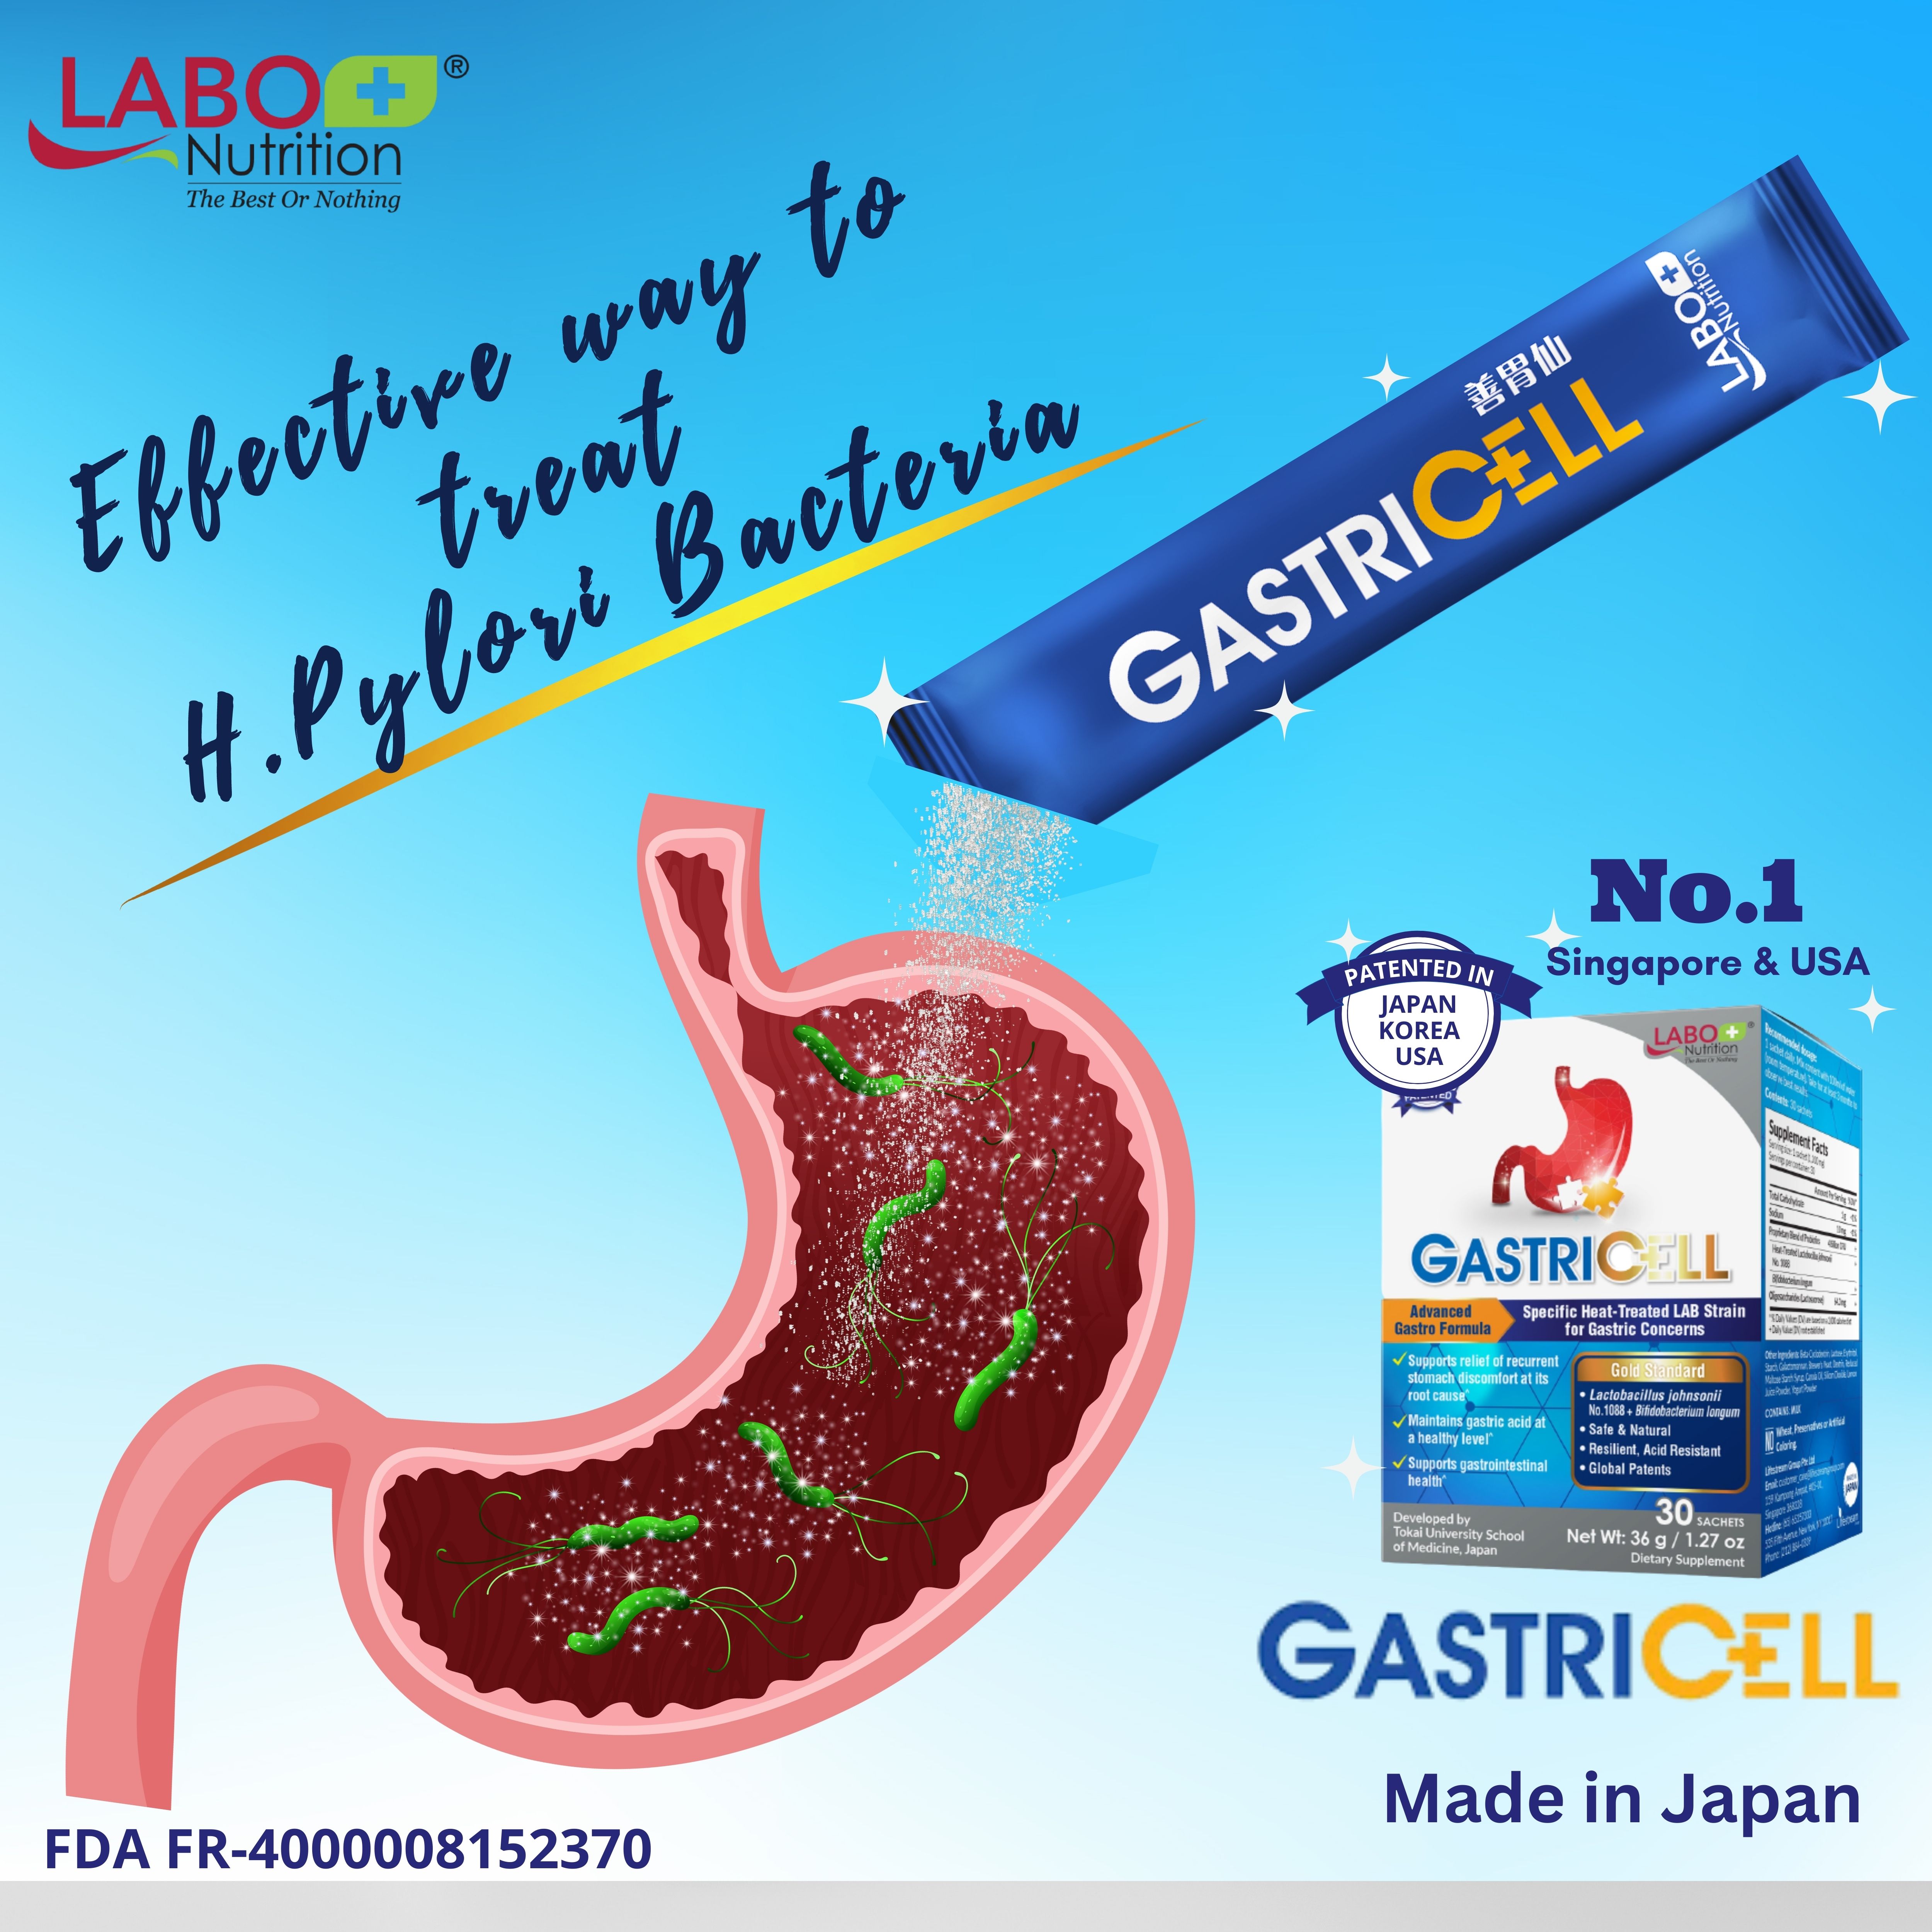 Gastricell Powder: Effective Relief for Gastric Problems